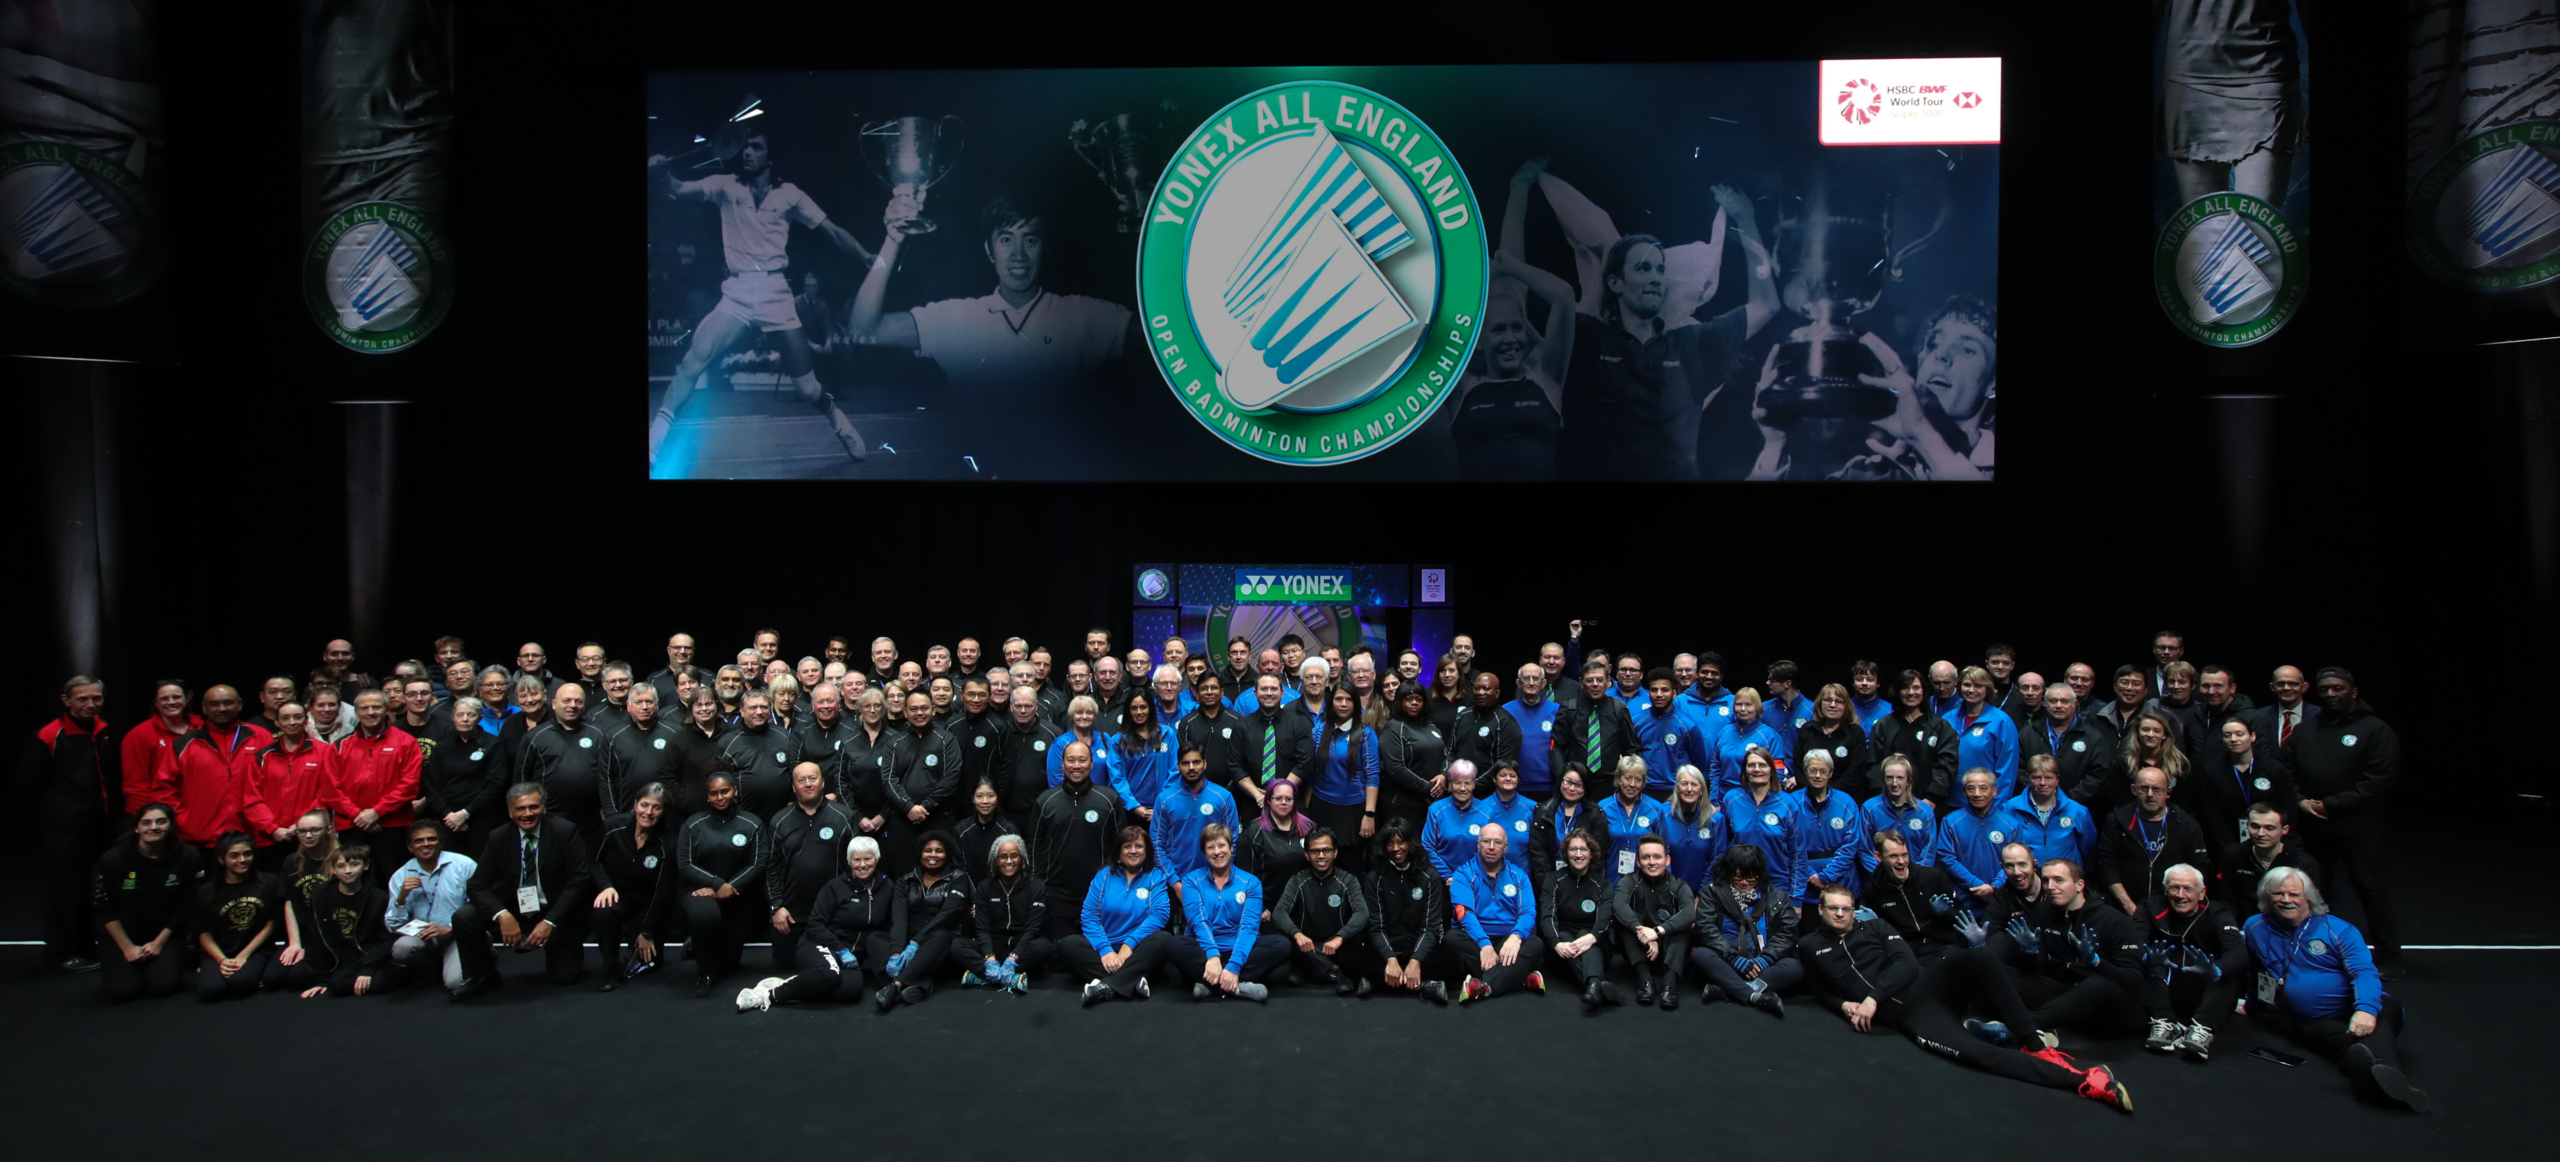 Behind the scenes at the YONEX All England All England Badminton